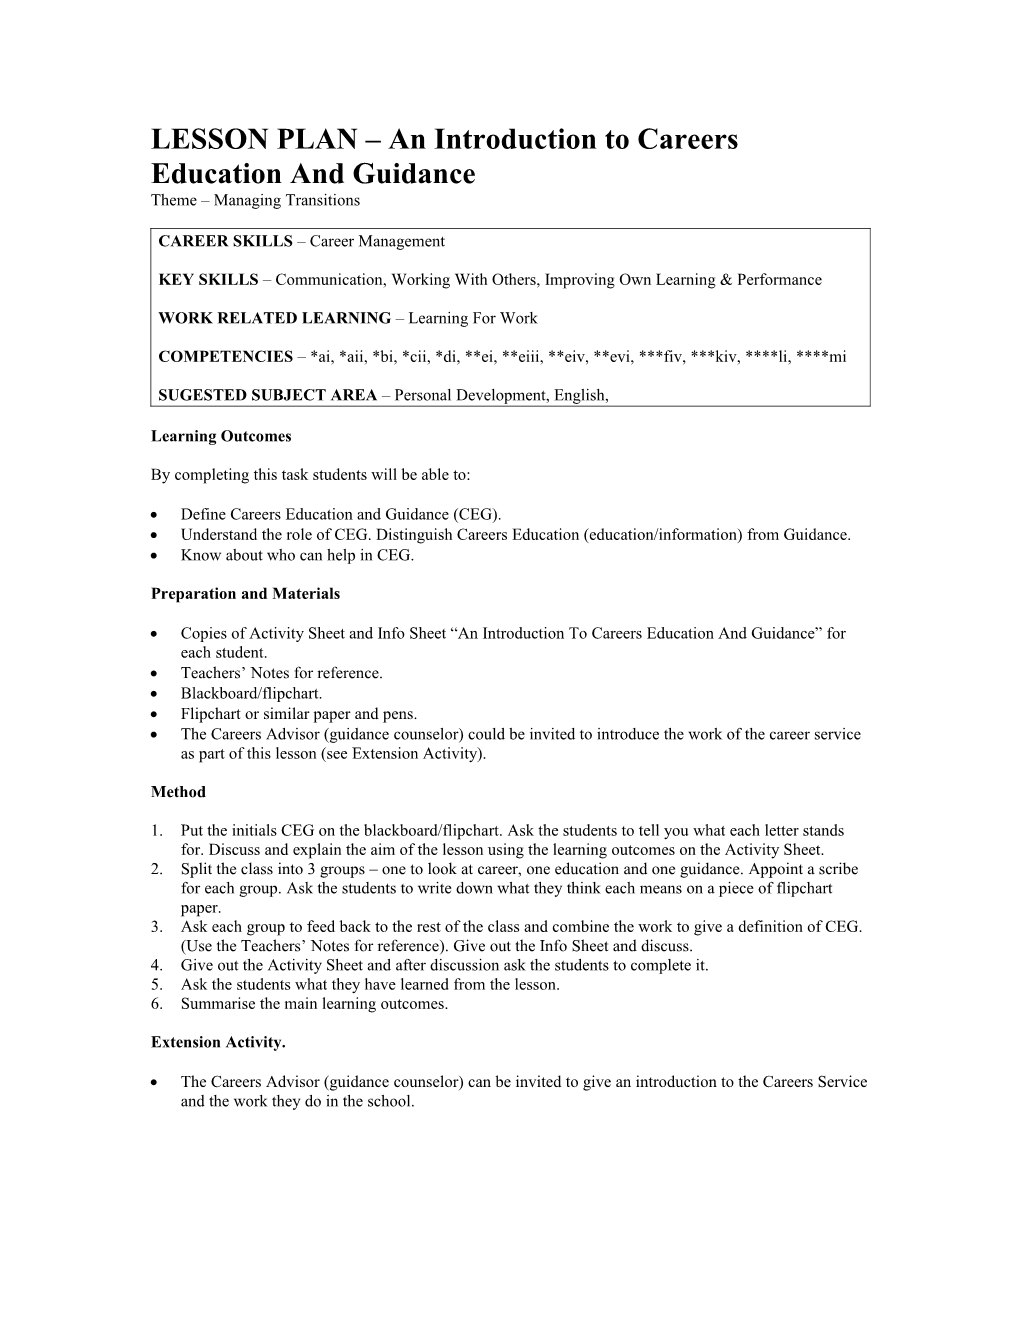 LESSON PLAN an Introduction to Careers Education and Guidance